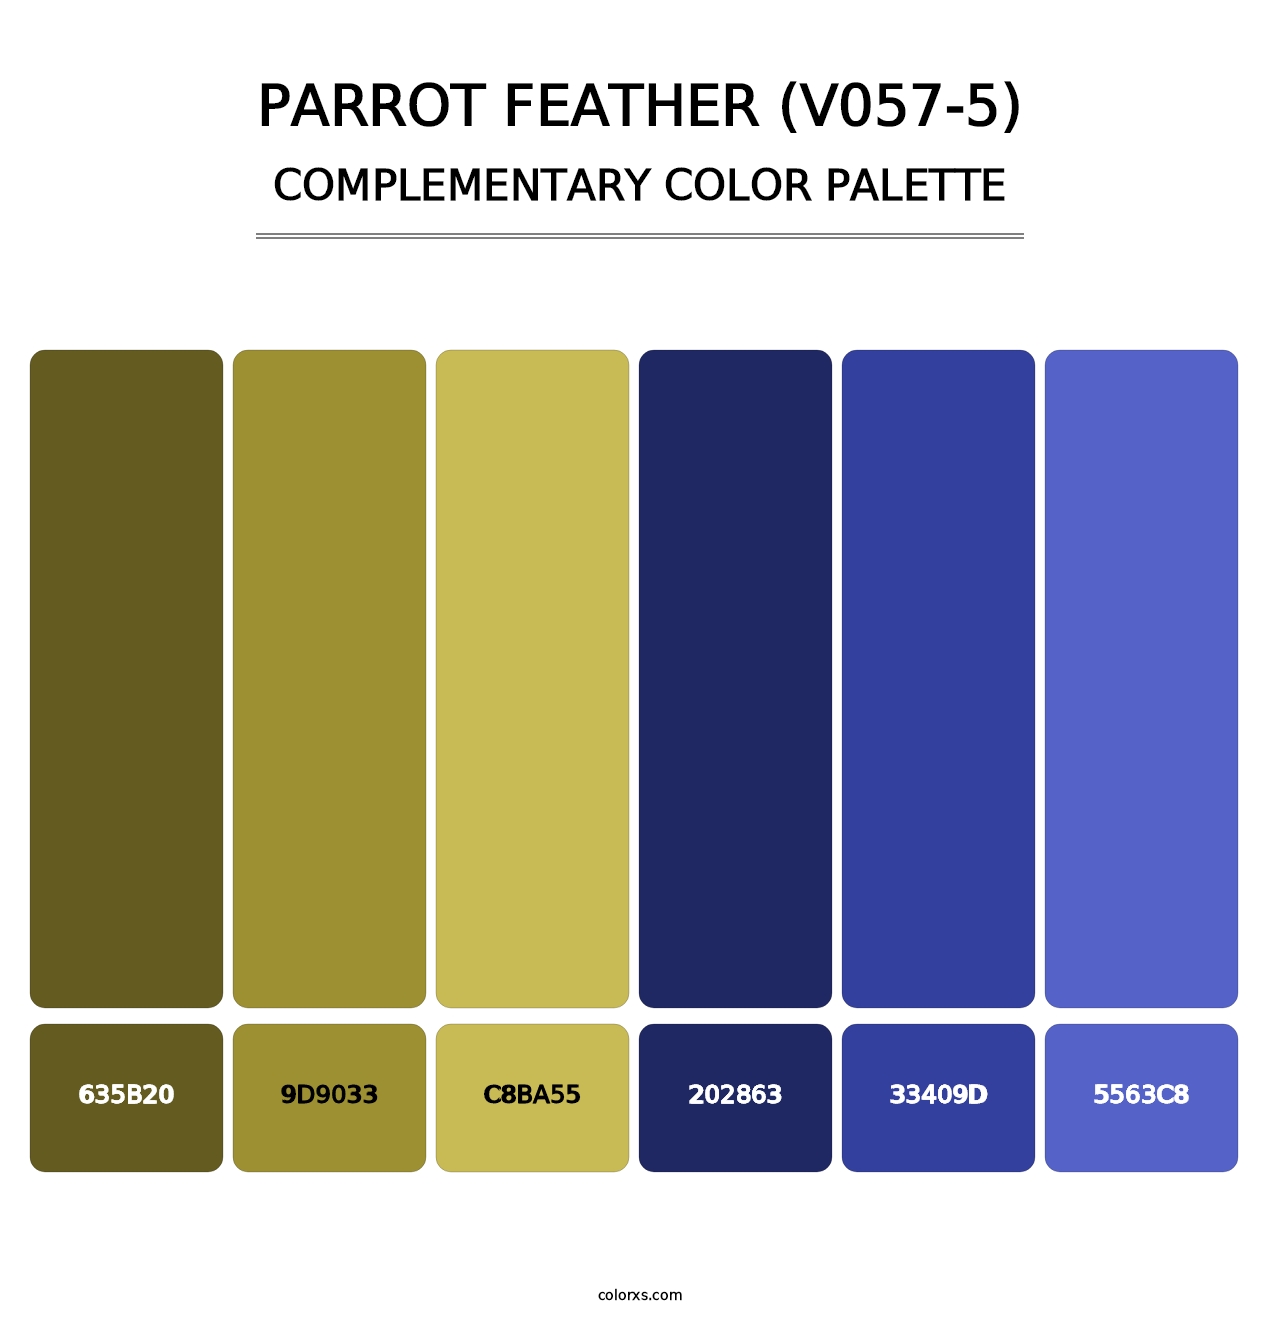 Parrot Feather (V057-5) - Complementary Color Palette